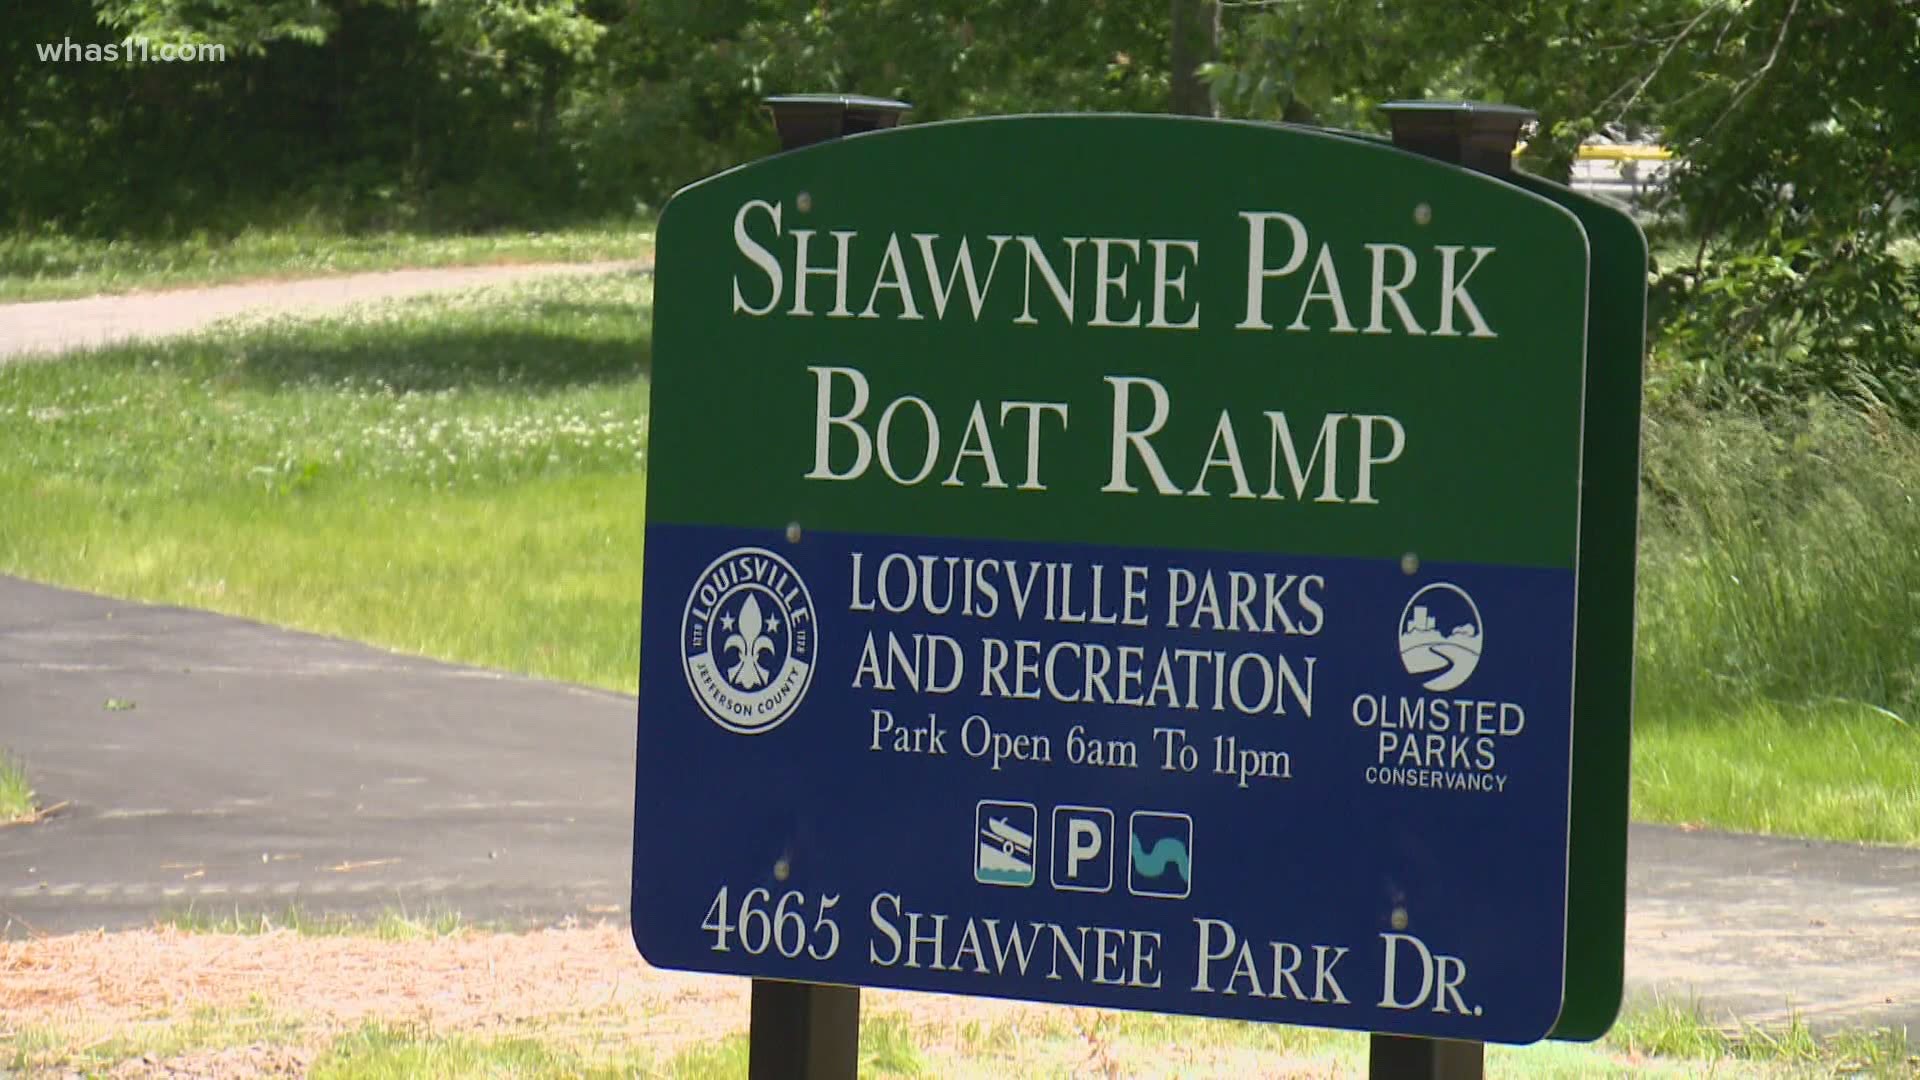 The ramp in Shawnee Park offers access for residents to fish and enhances recreational passage to the Ohio River.